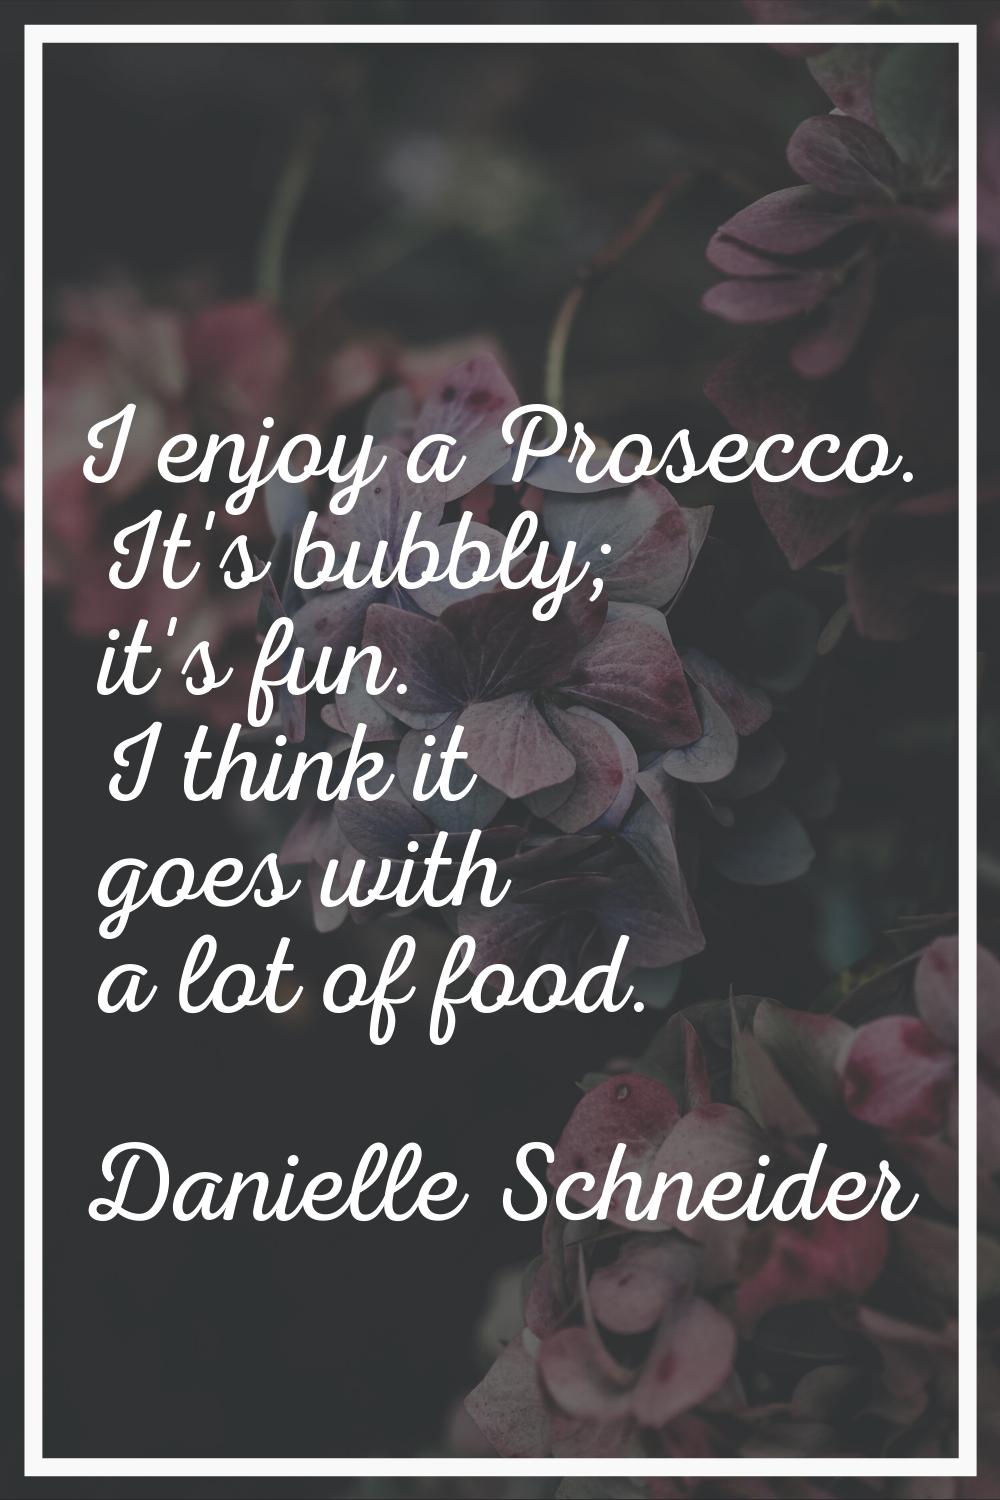 I enjoy a Prosecco. It's bubbly; it's fun. I think it goes with a lot of food.